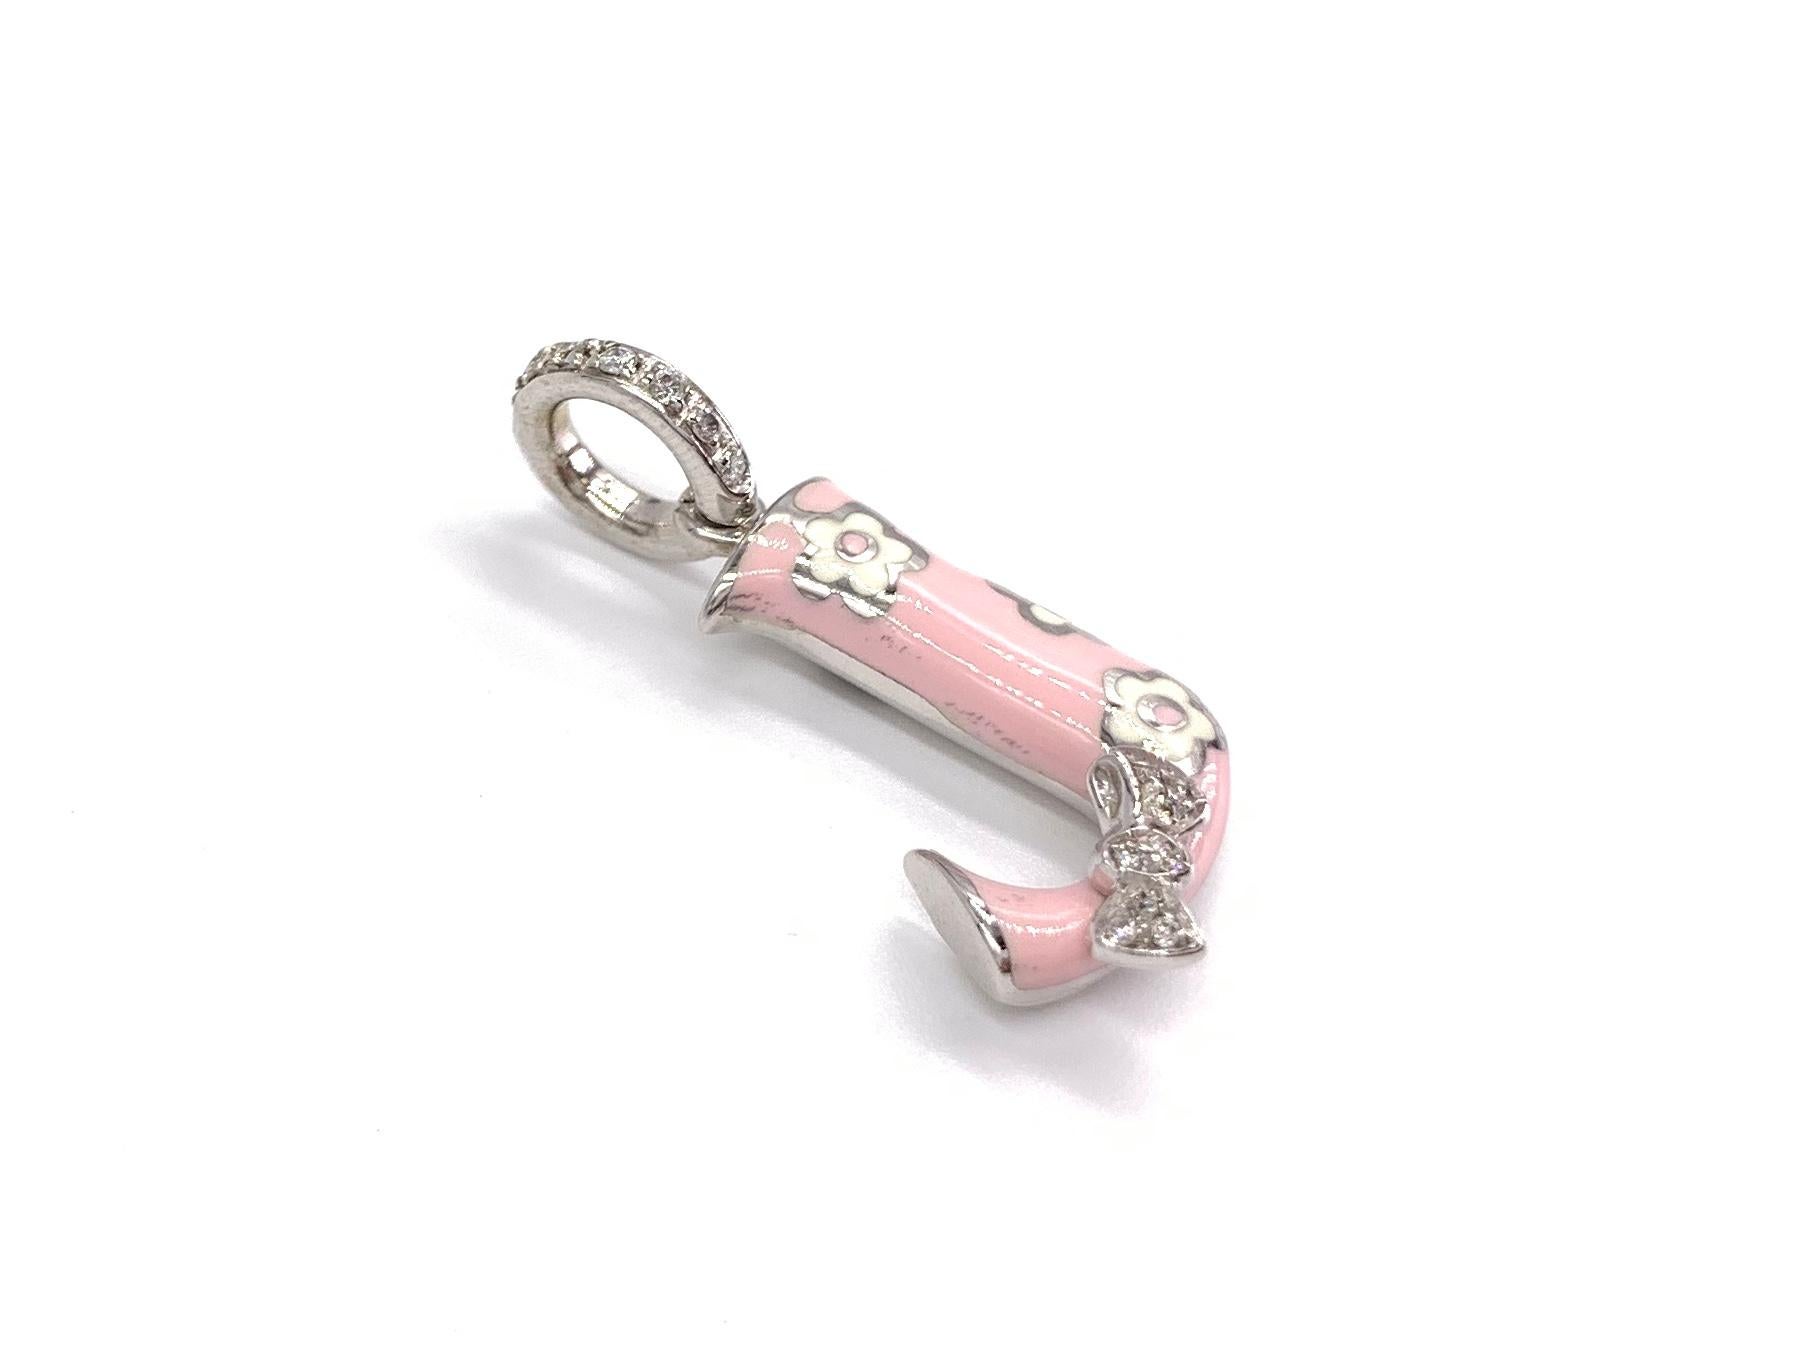 A hand made 18k white gold Aaron Basha letter J charm or pendant featuring .08 carats of round brilliant white diamonds (approximately G color, VS2 clarity) on the bale & on the adorable bow accent. Light blush pink & white enamel are hand